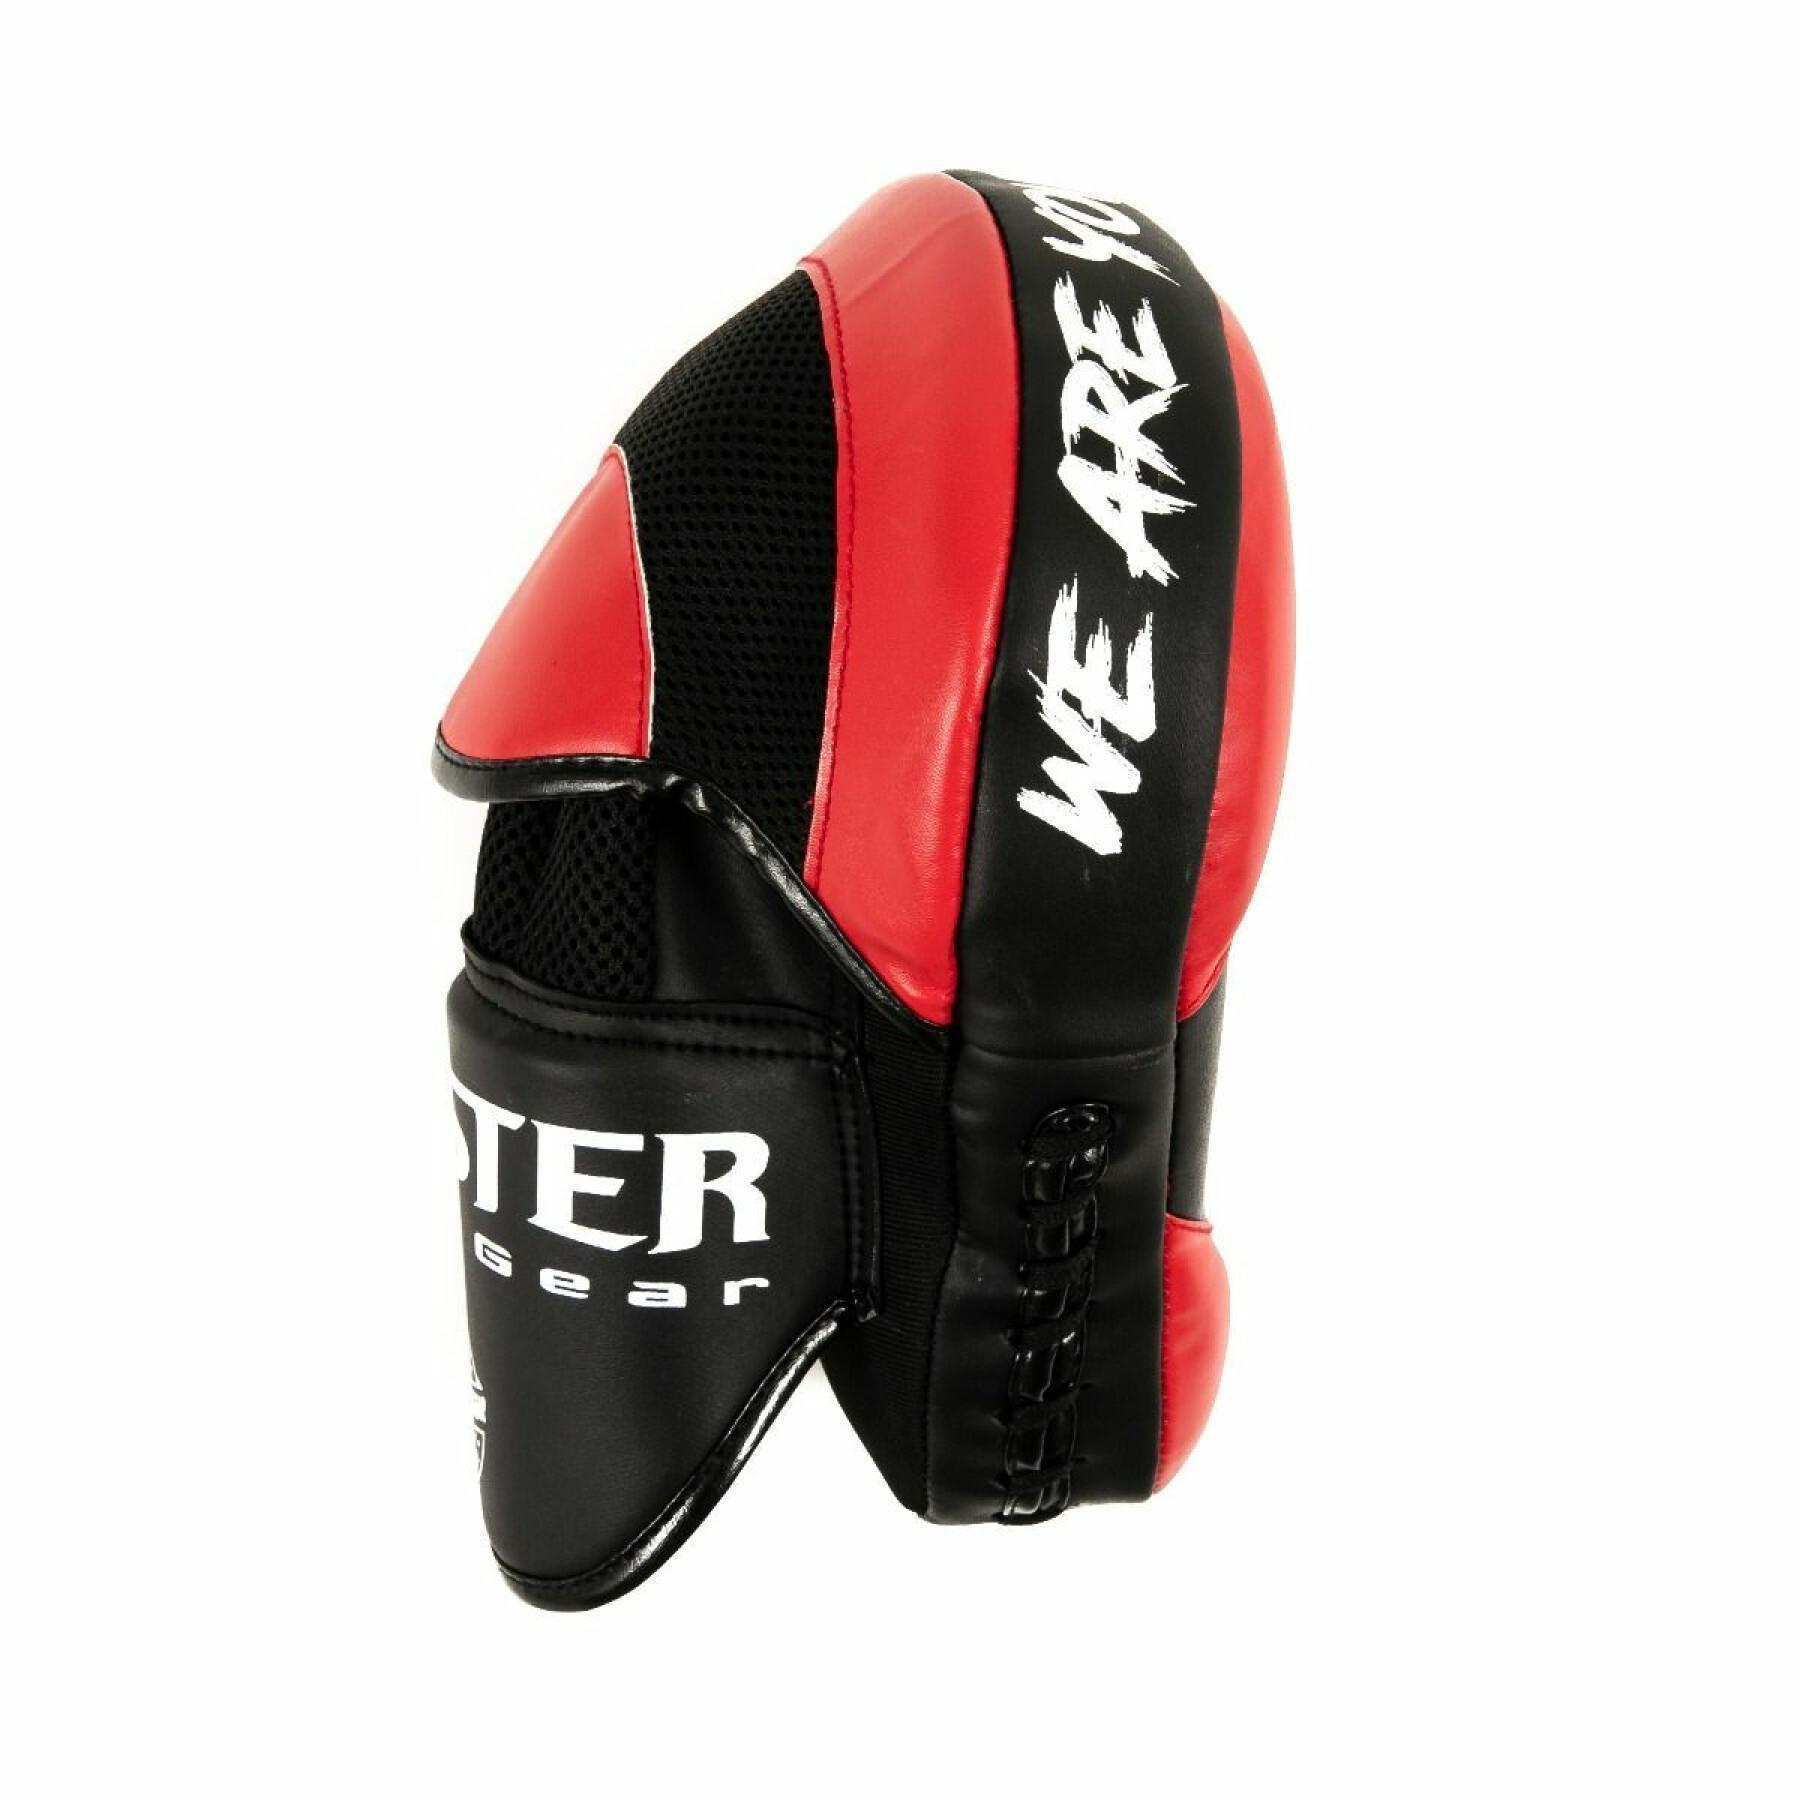 Bear paws Booster Fight Gear Pml Bc 4